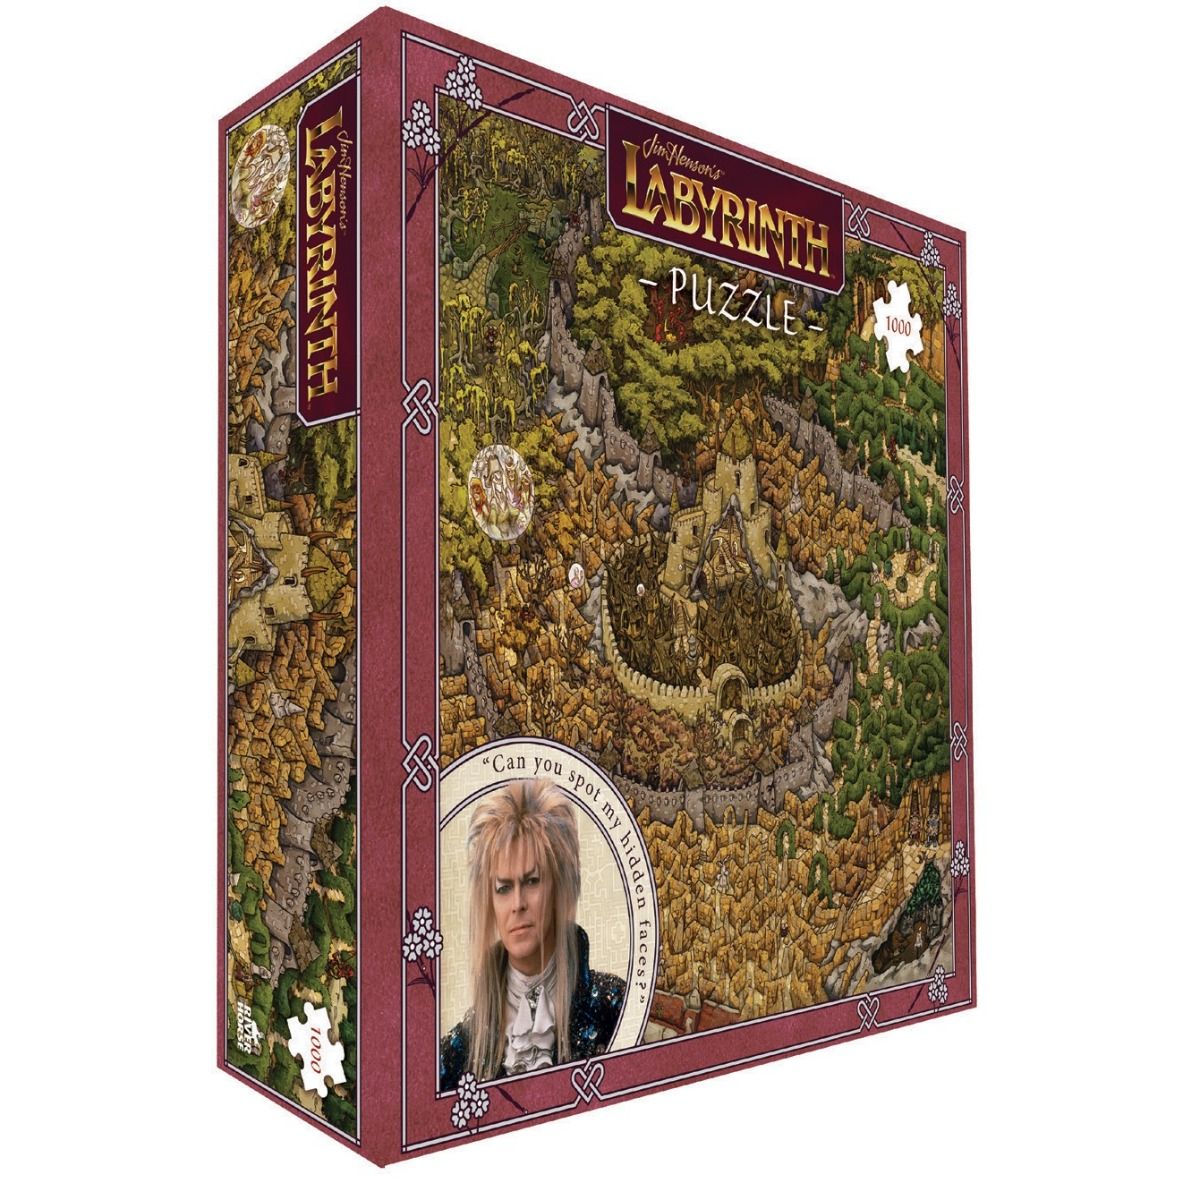 Jim Hensons The Labyrinth Puzzle